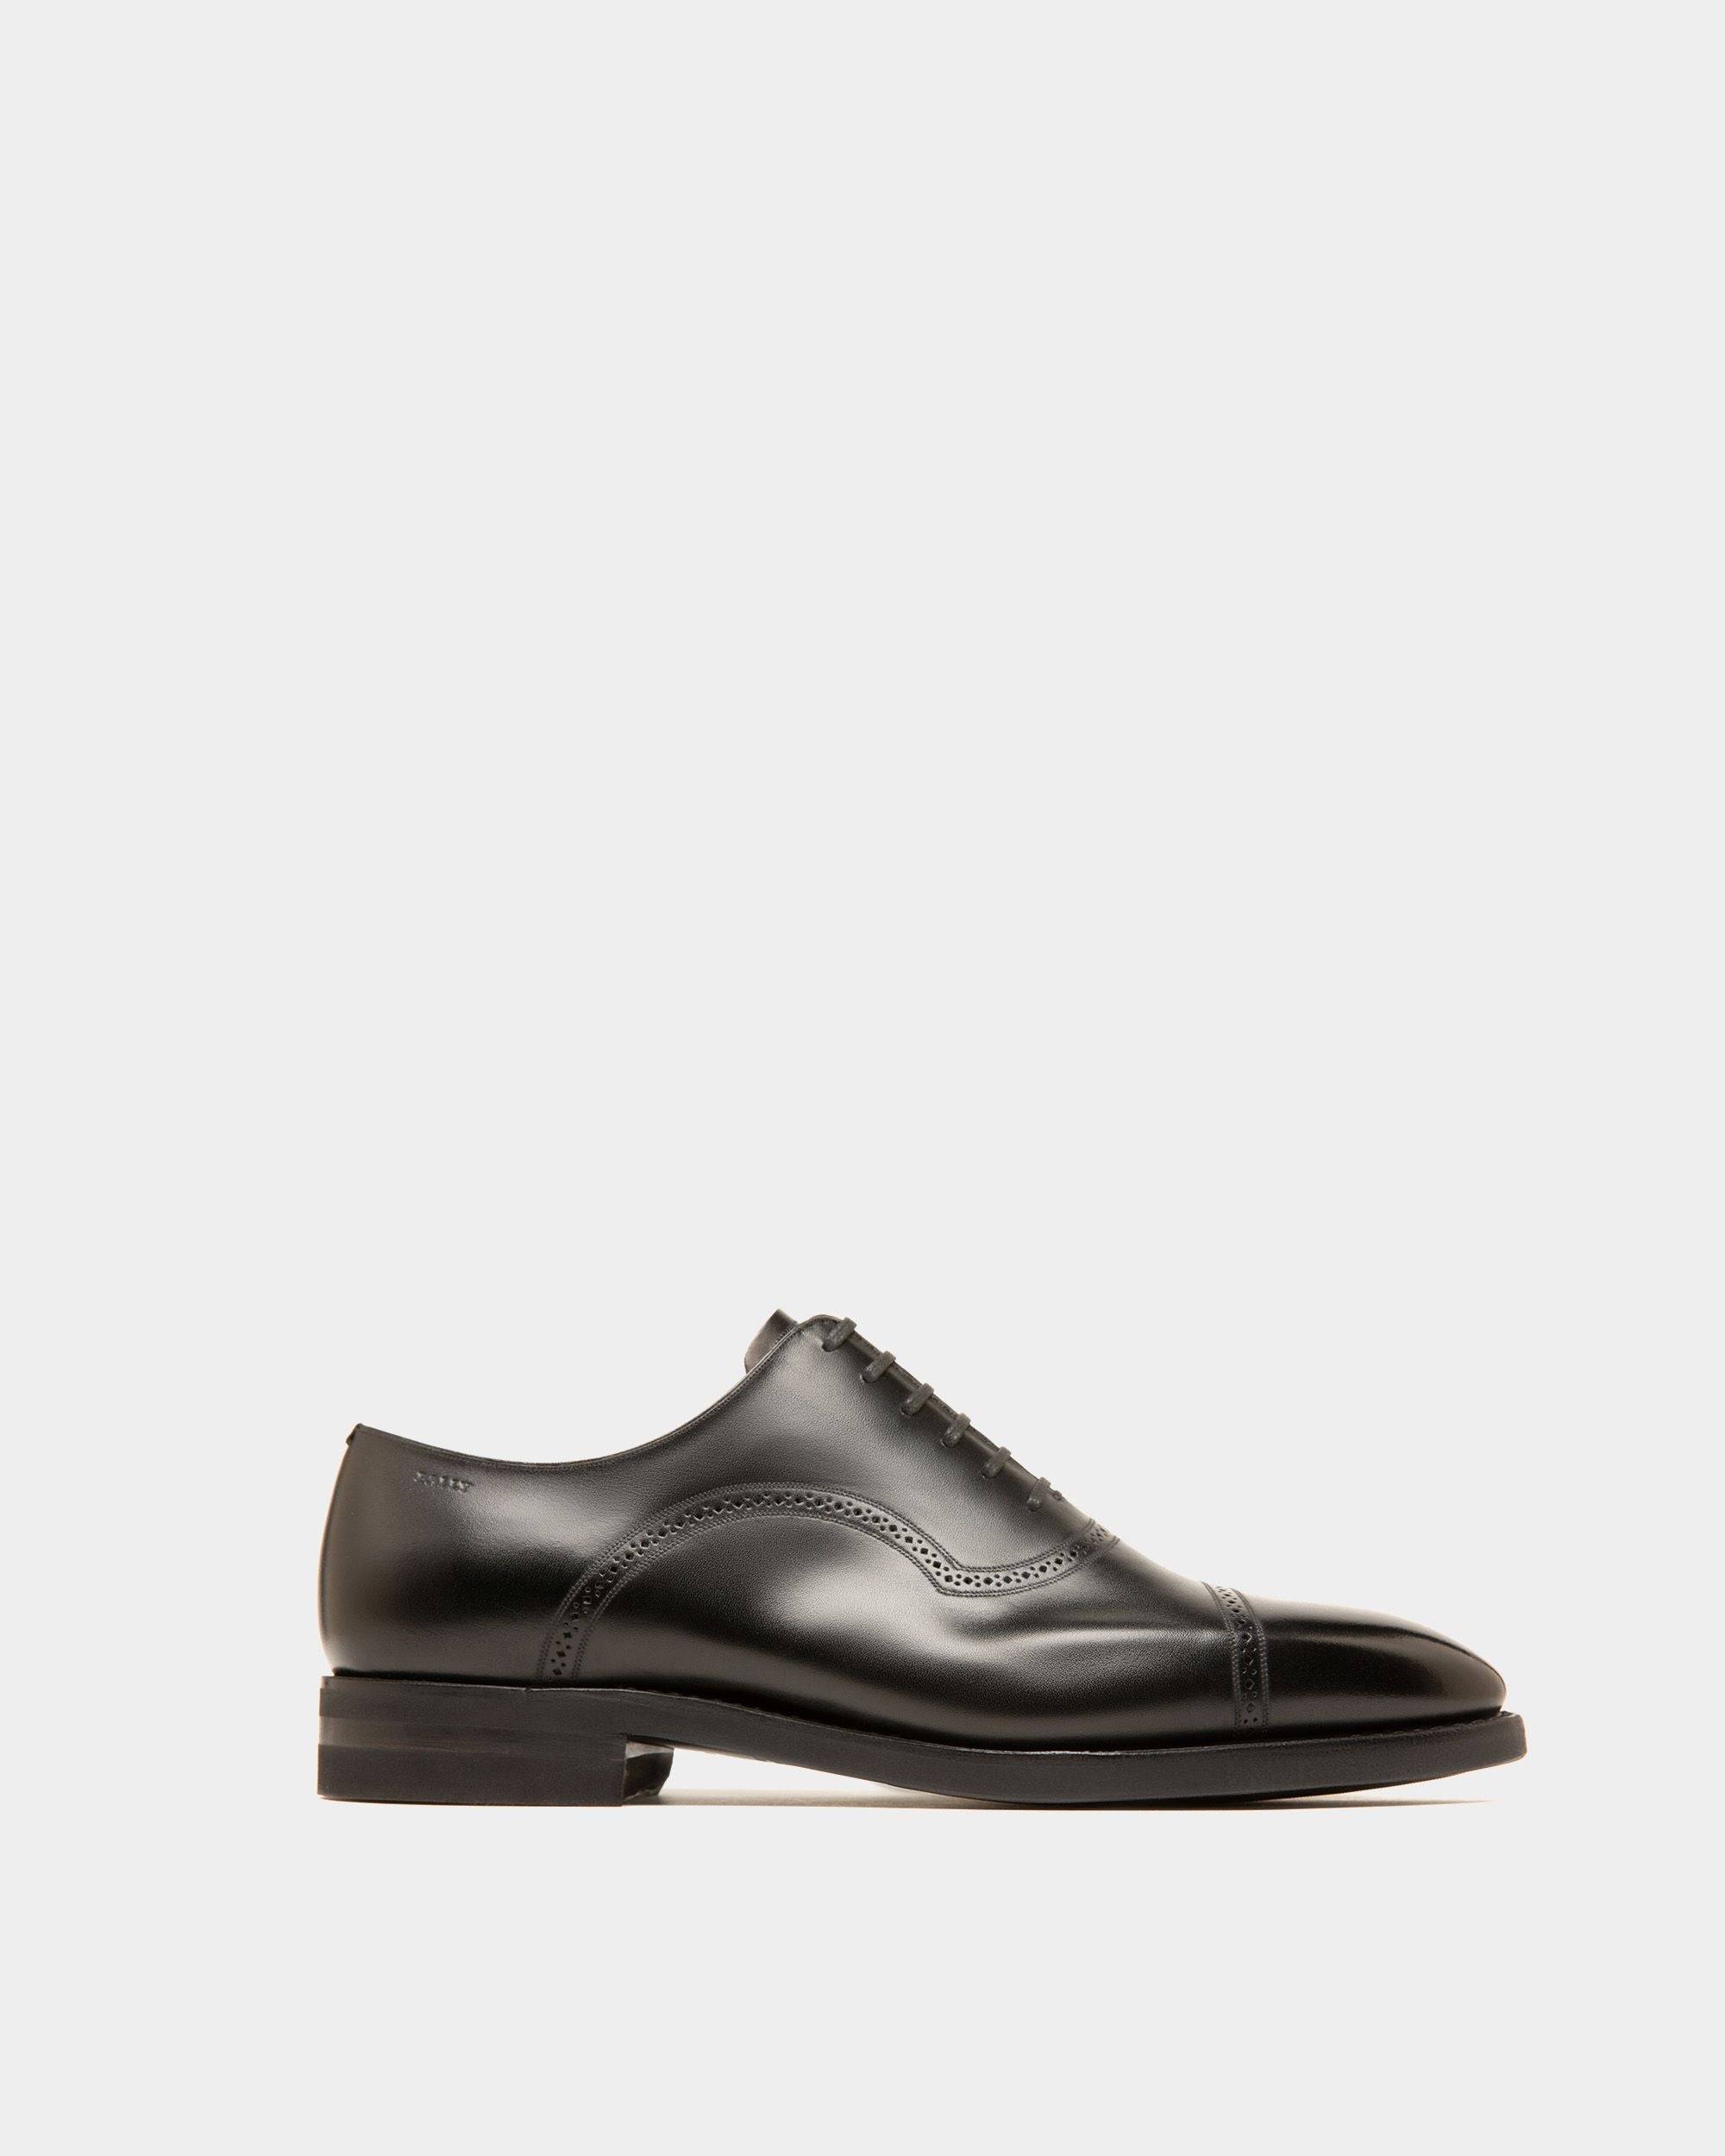 Men's Scribe Novo Oxford Shoes In Black Leather | Bally | Still Life Side